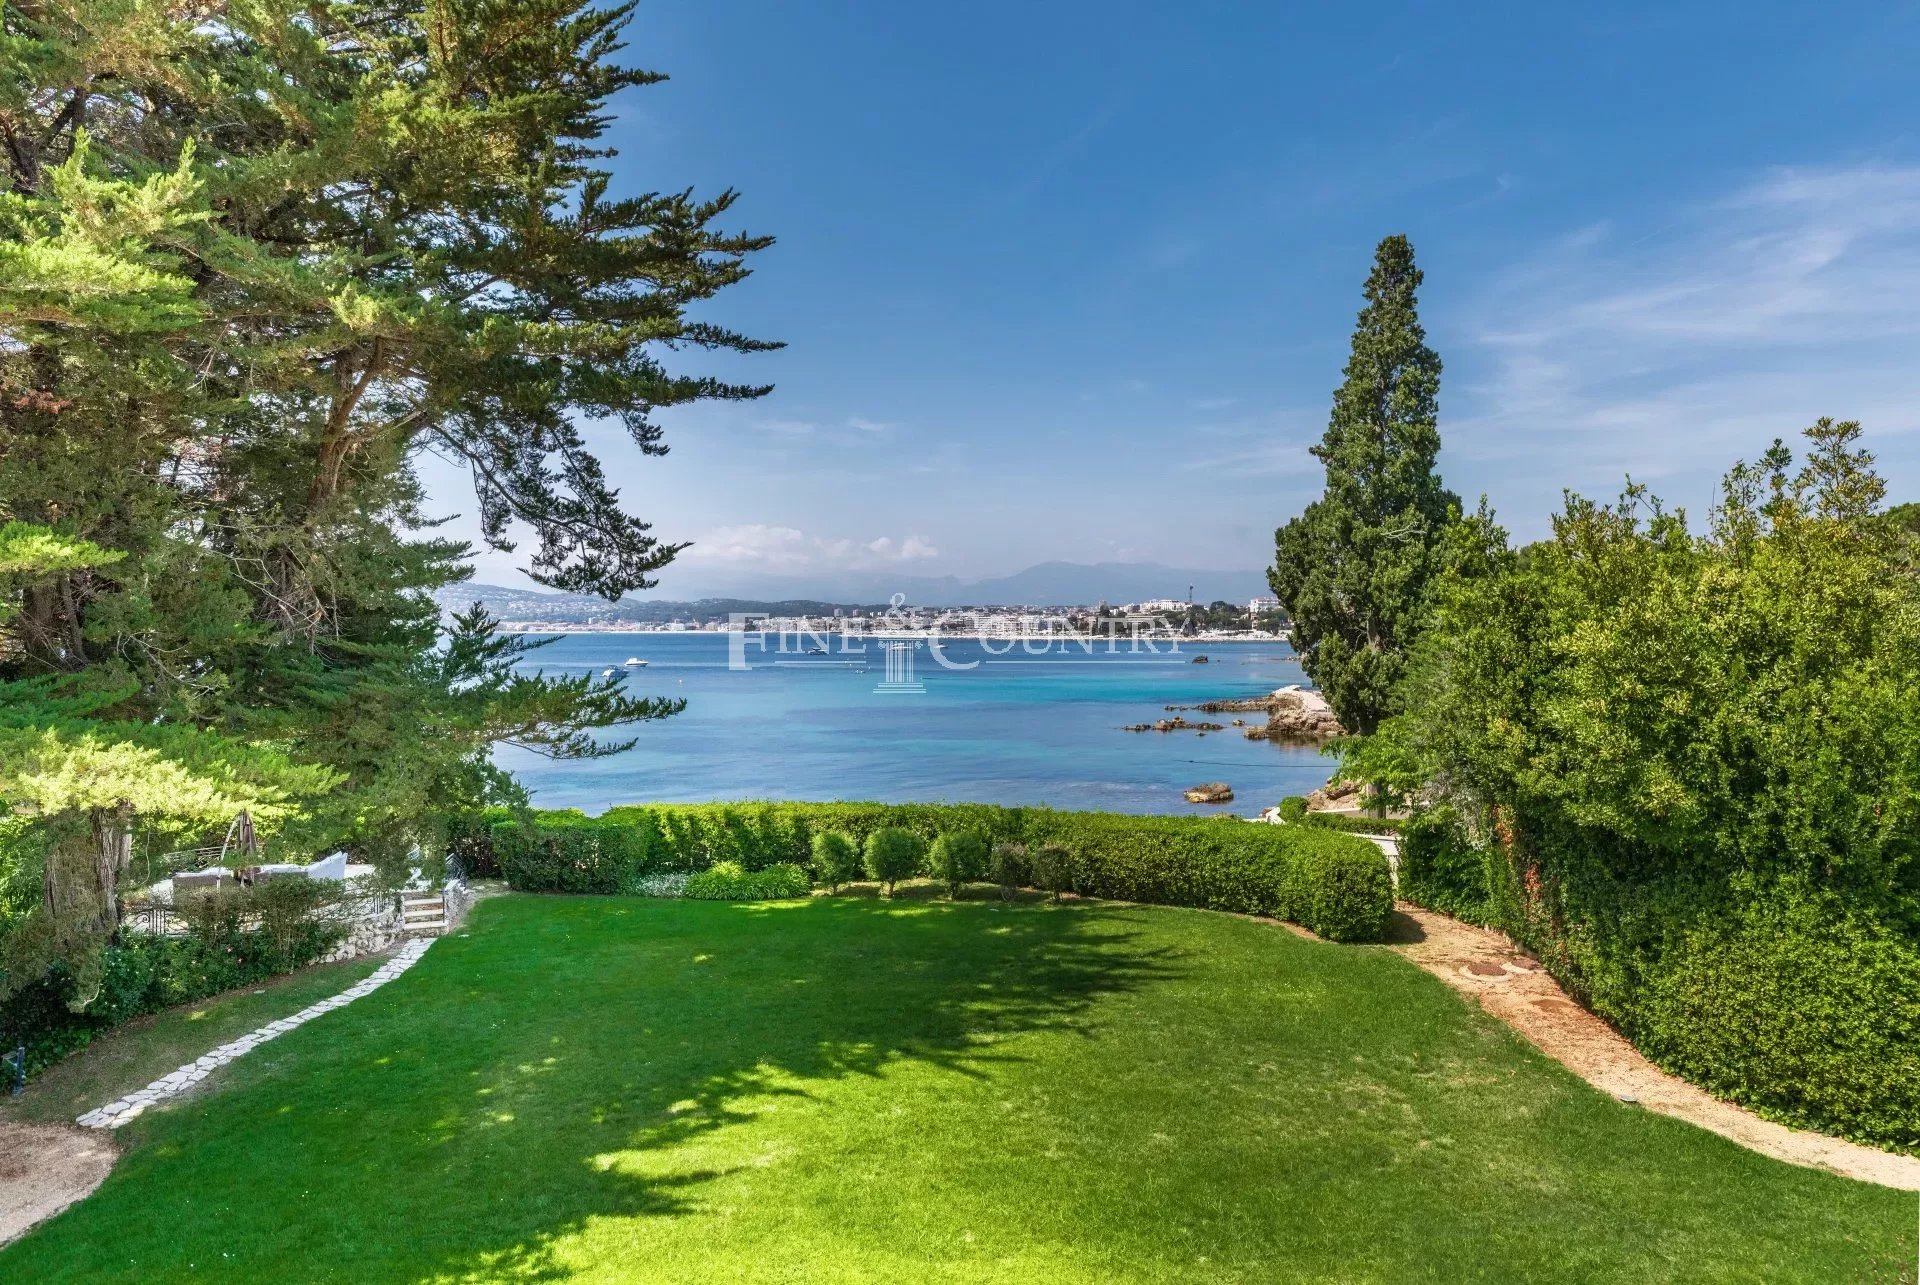 Seafront Villa for sale on the Cap d'Antibes